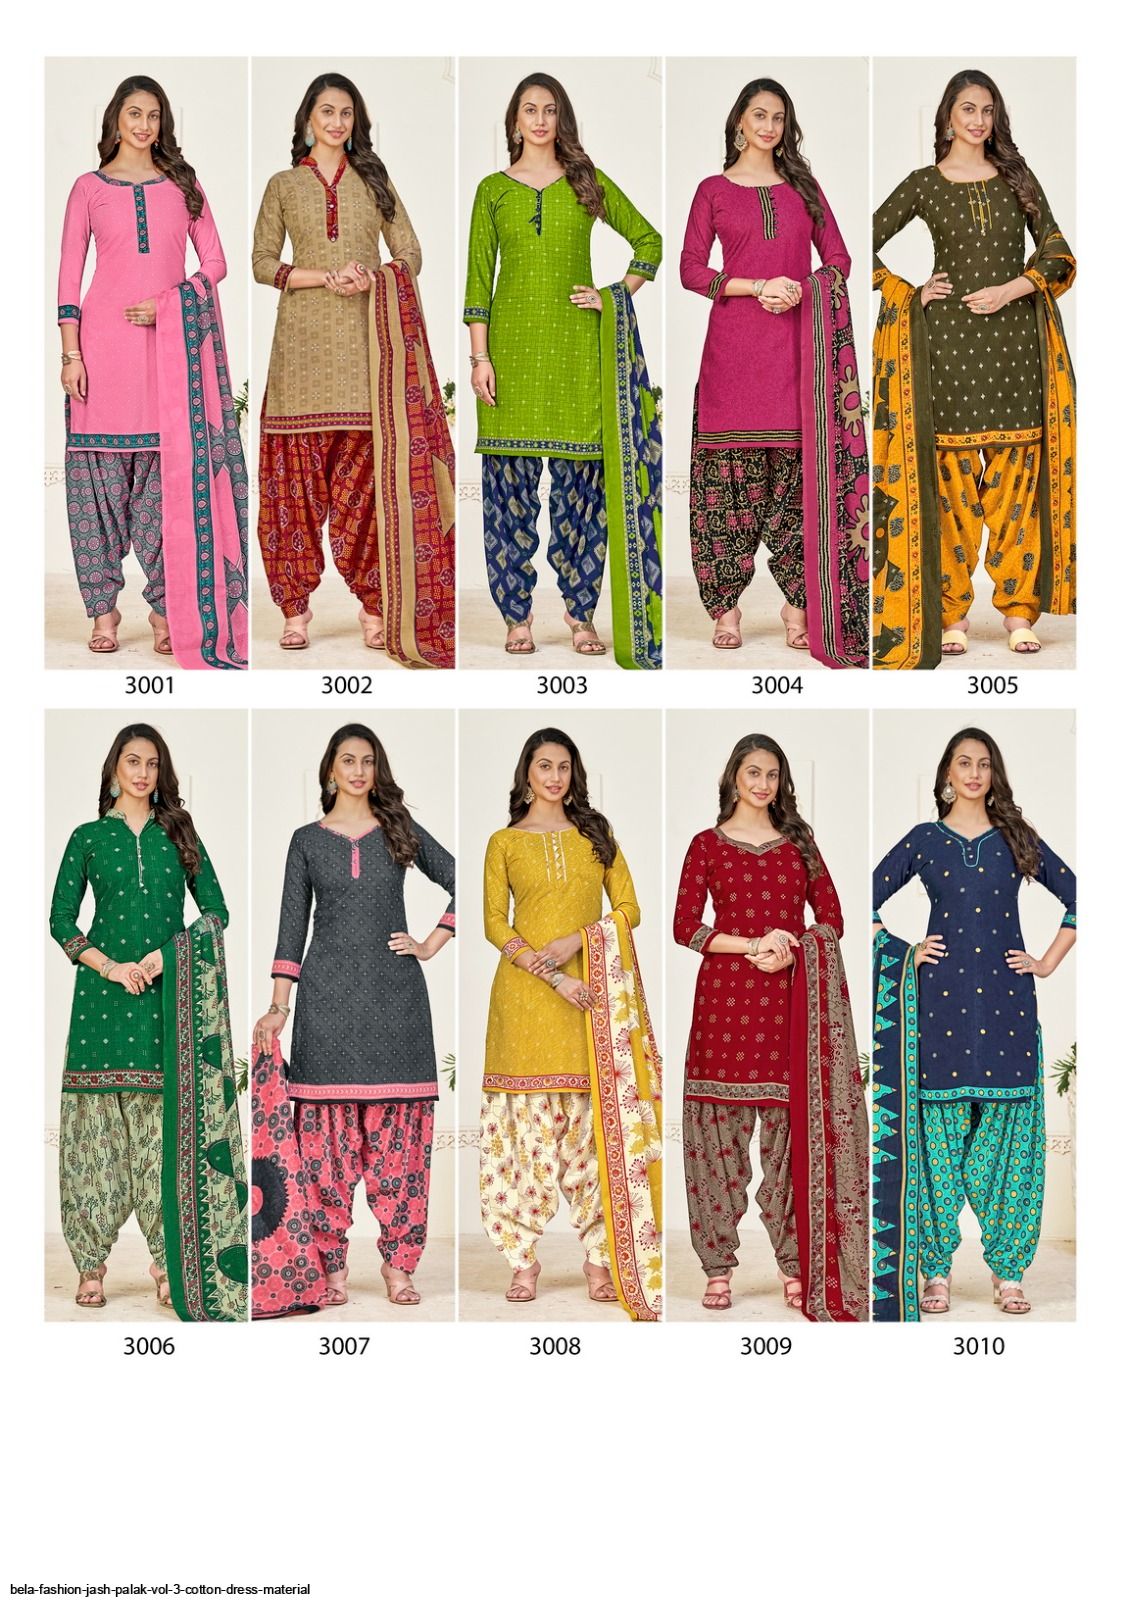 Buy Set of 7 Mughal Inspired Printed Dress Material with Lace (7PDM1)  Online at Best Price in India on Naaptol.com